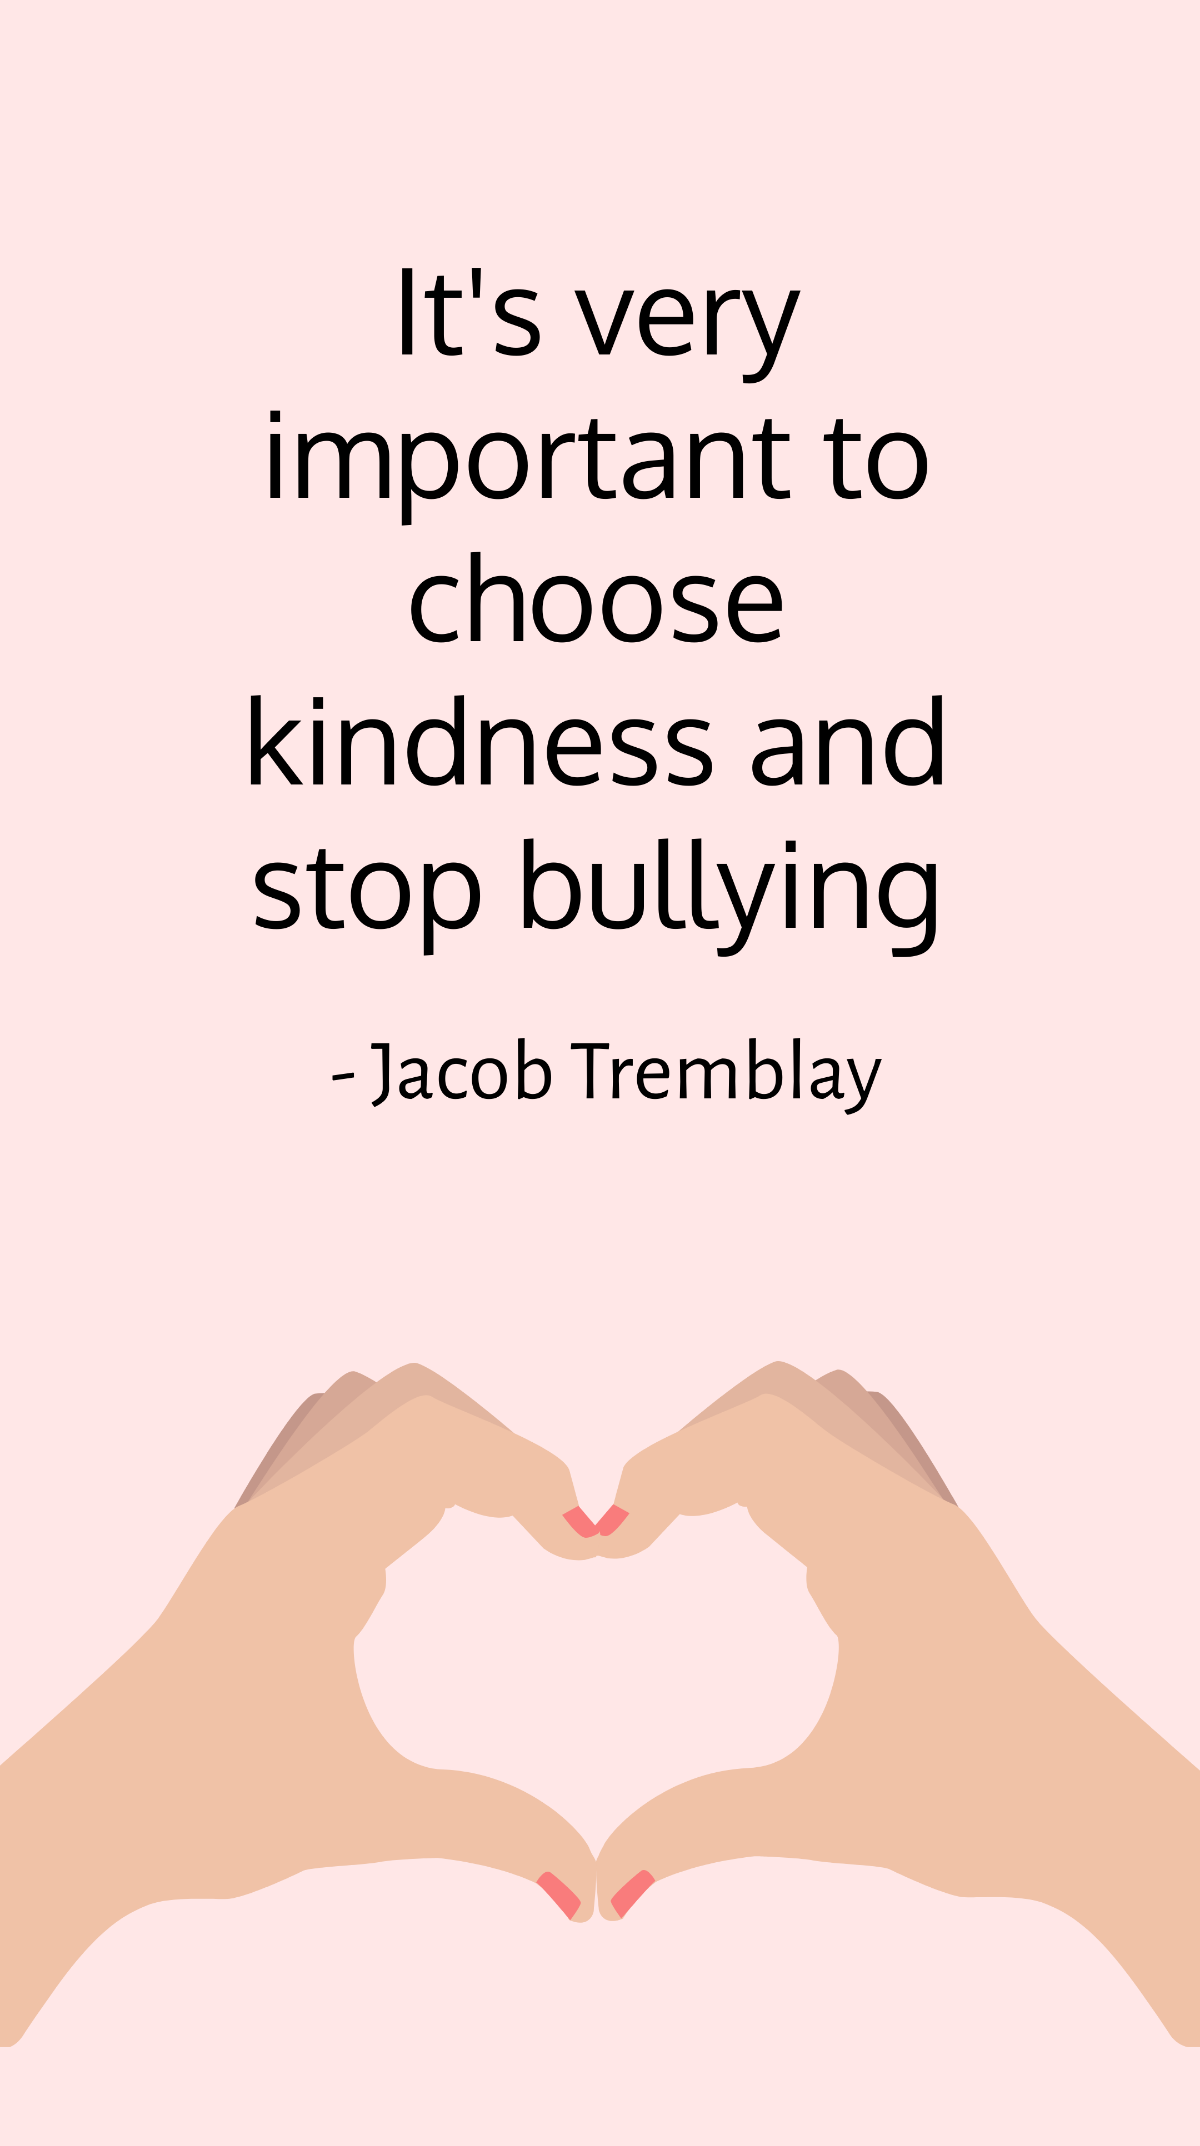 Free Jacob Tremblay - It's very important to choose kindness and stop bullying Template